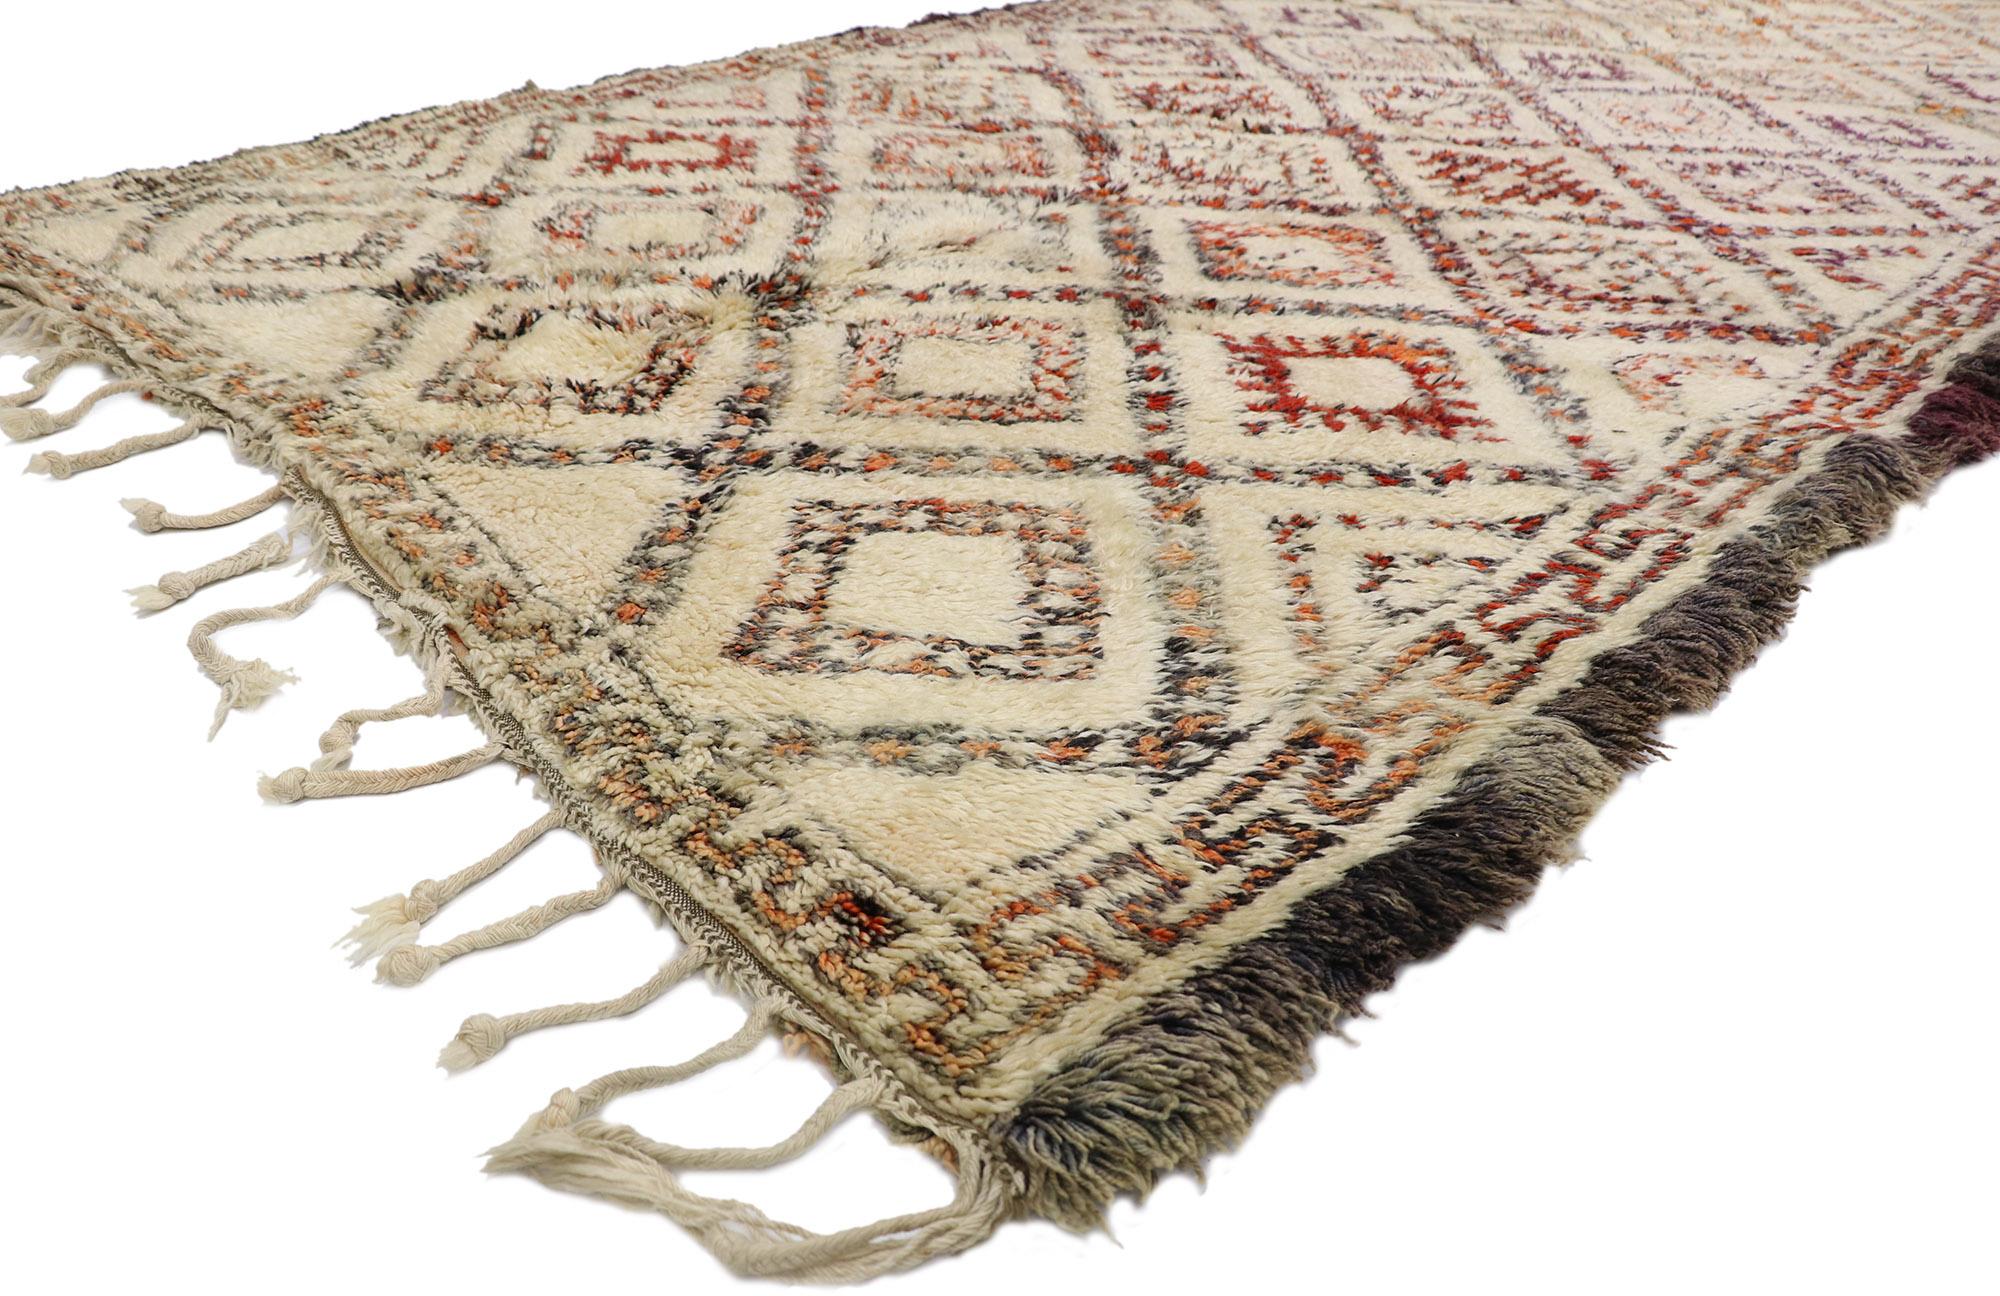 21355 Vintage Beni Ourain Moroccan Rug, 06'01 x 12'06. Originating from the esteemed Beni Ourain tribe in Morocco, these intricately crafted rugs honor tradition with meticulous attention to detail, utilizing untreated sheep's wool to infuse spaces